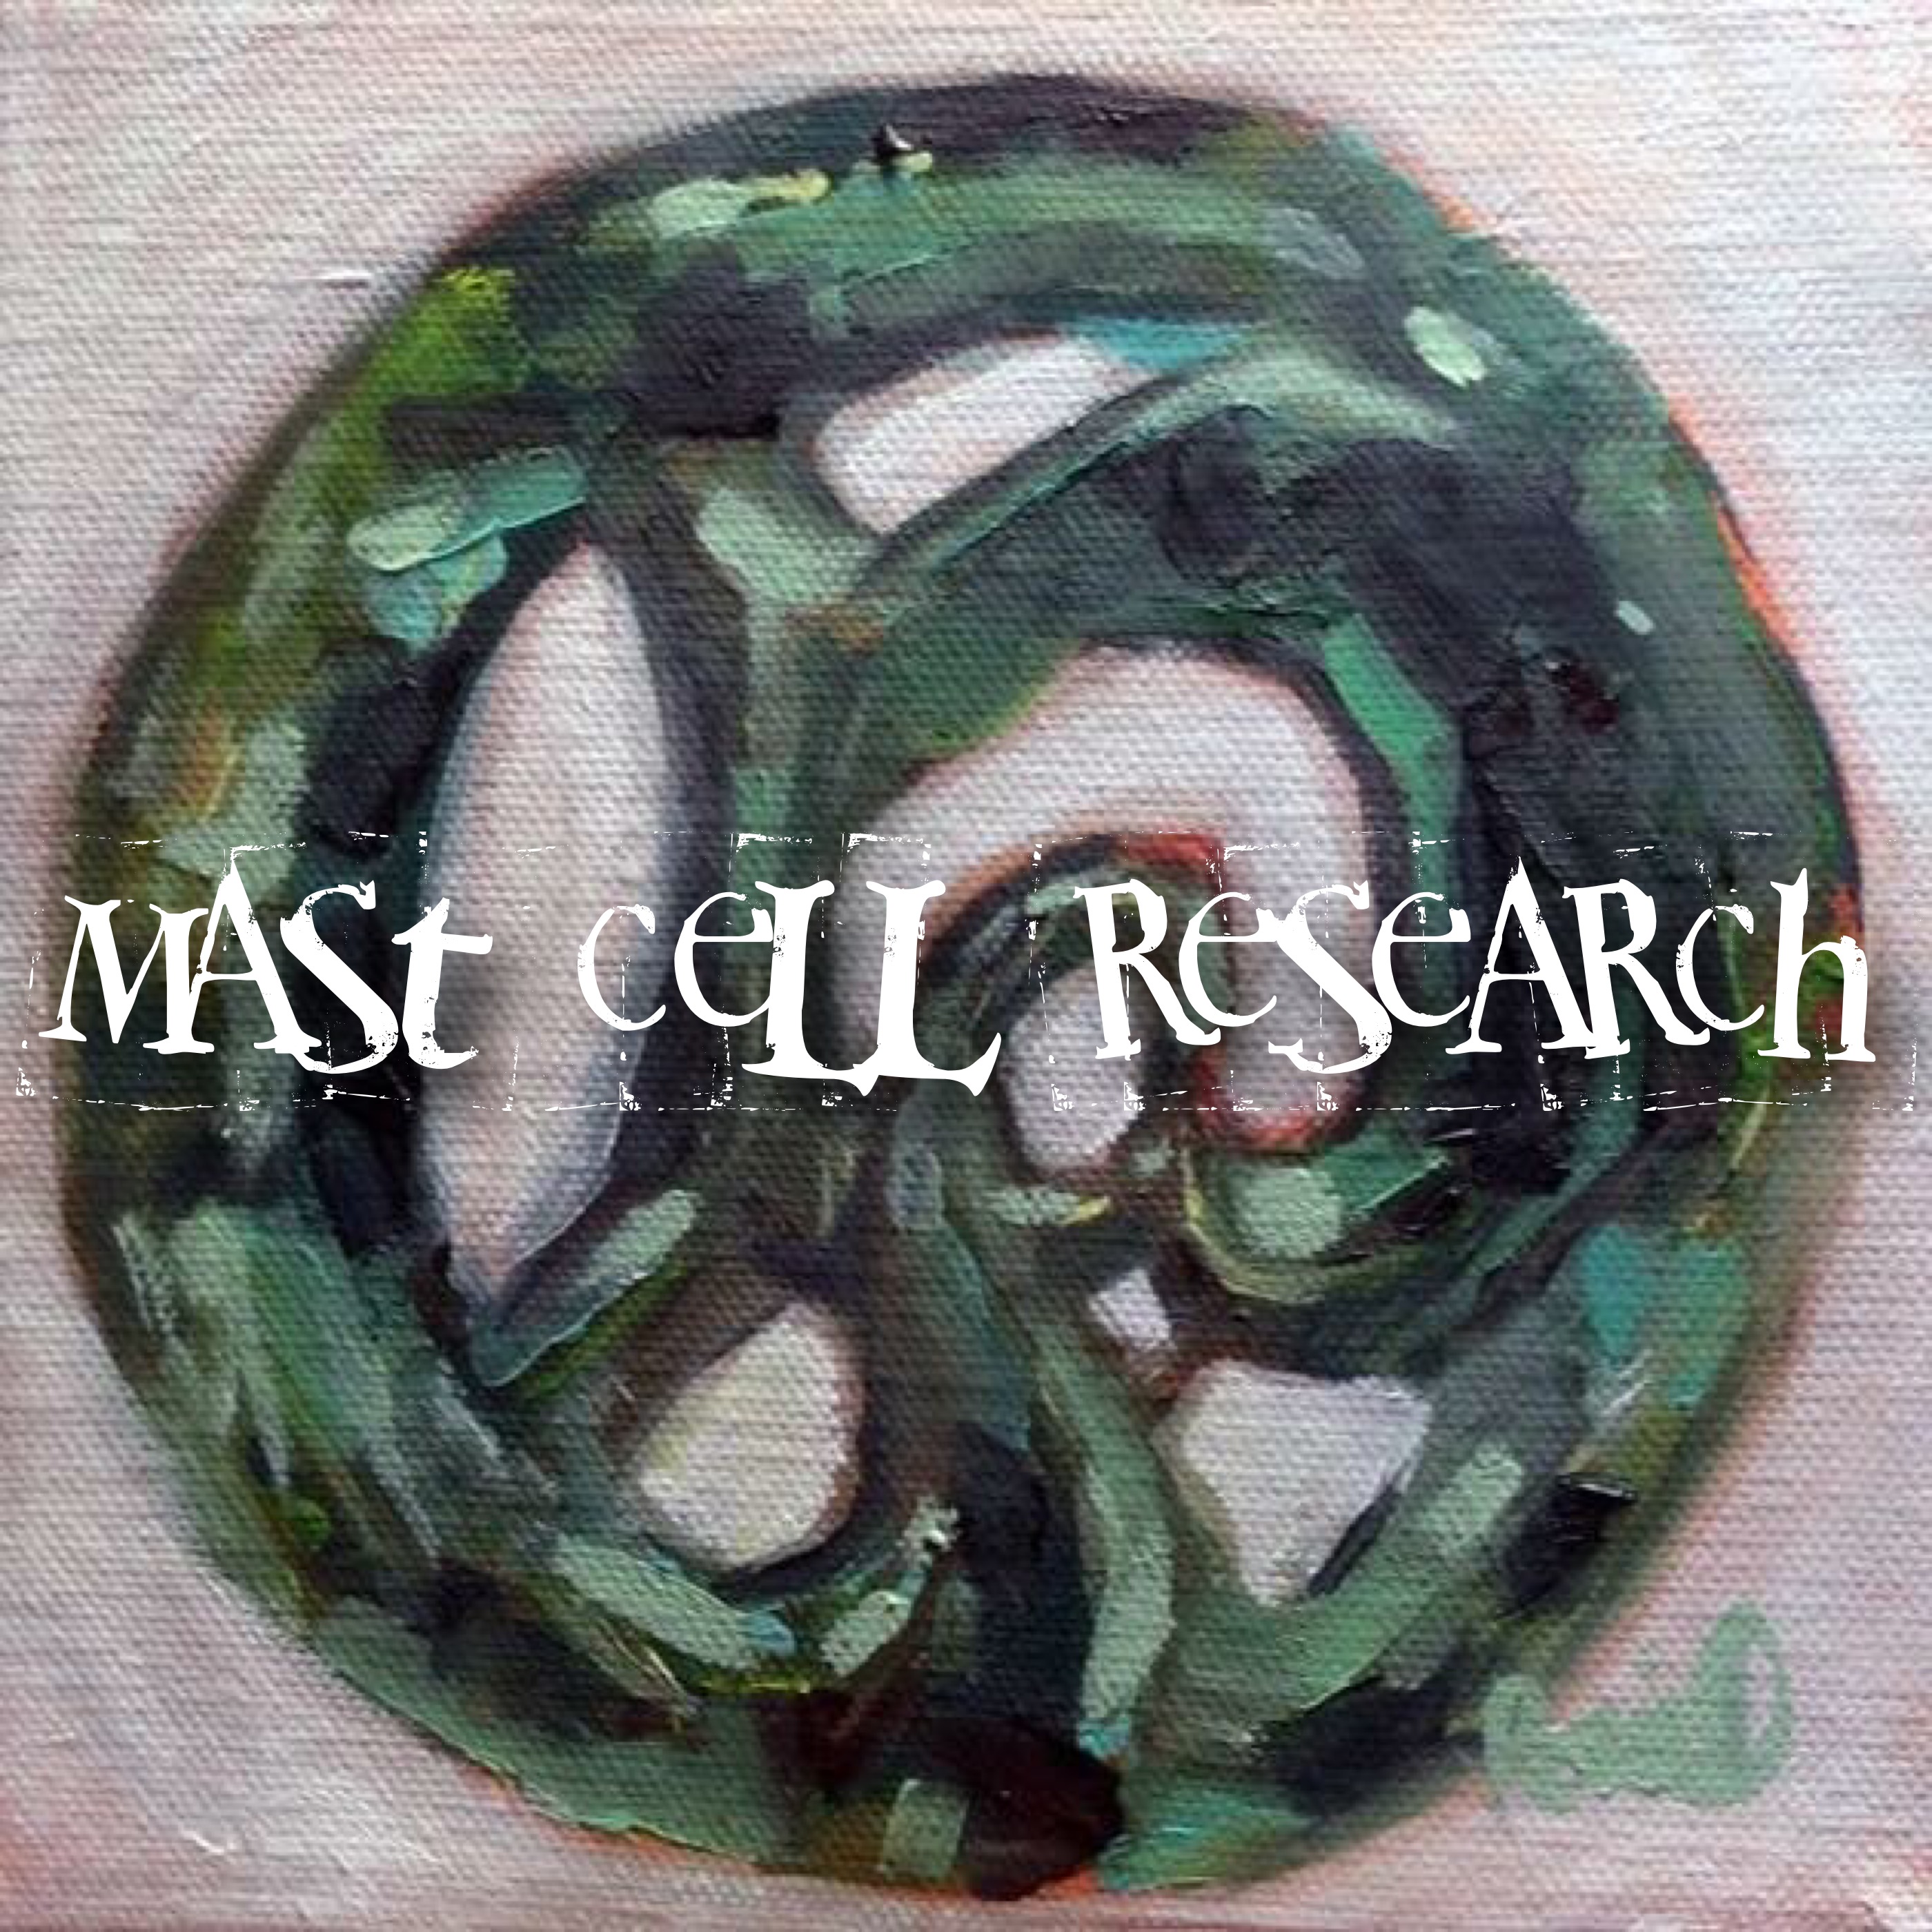 Mast Cell Research Contest and Wellapalooza 2016 Sponsor Raffle Prize Winners!